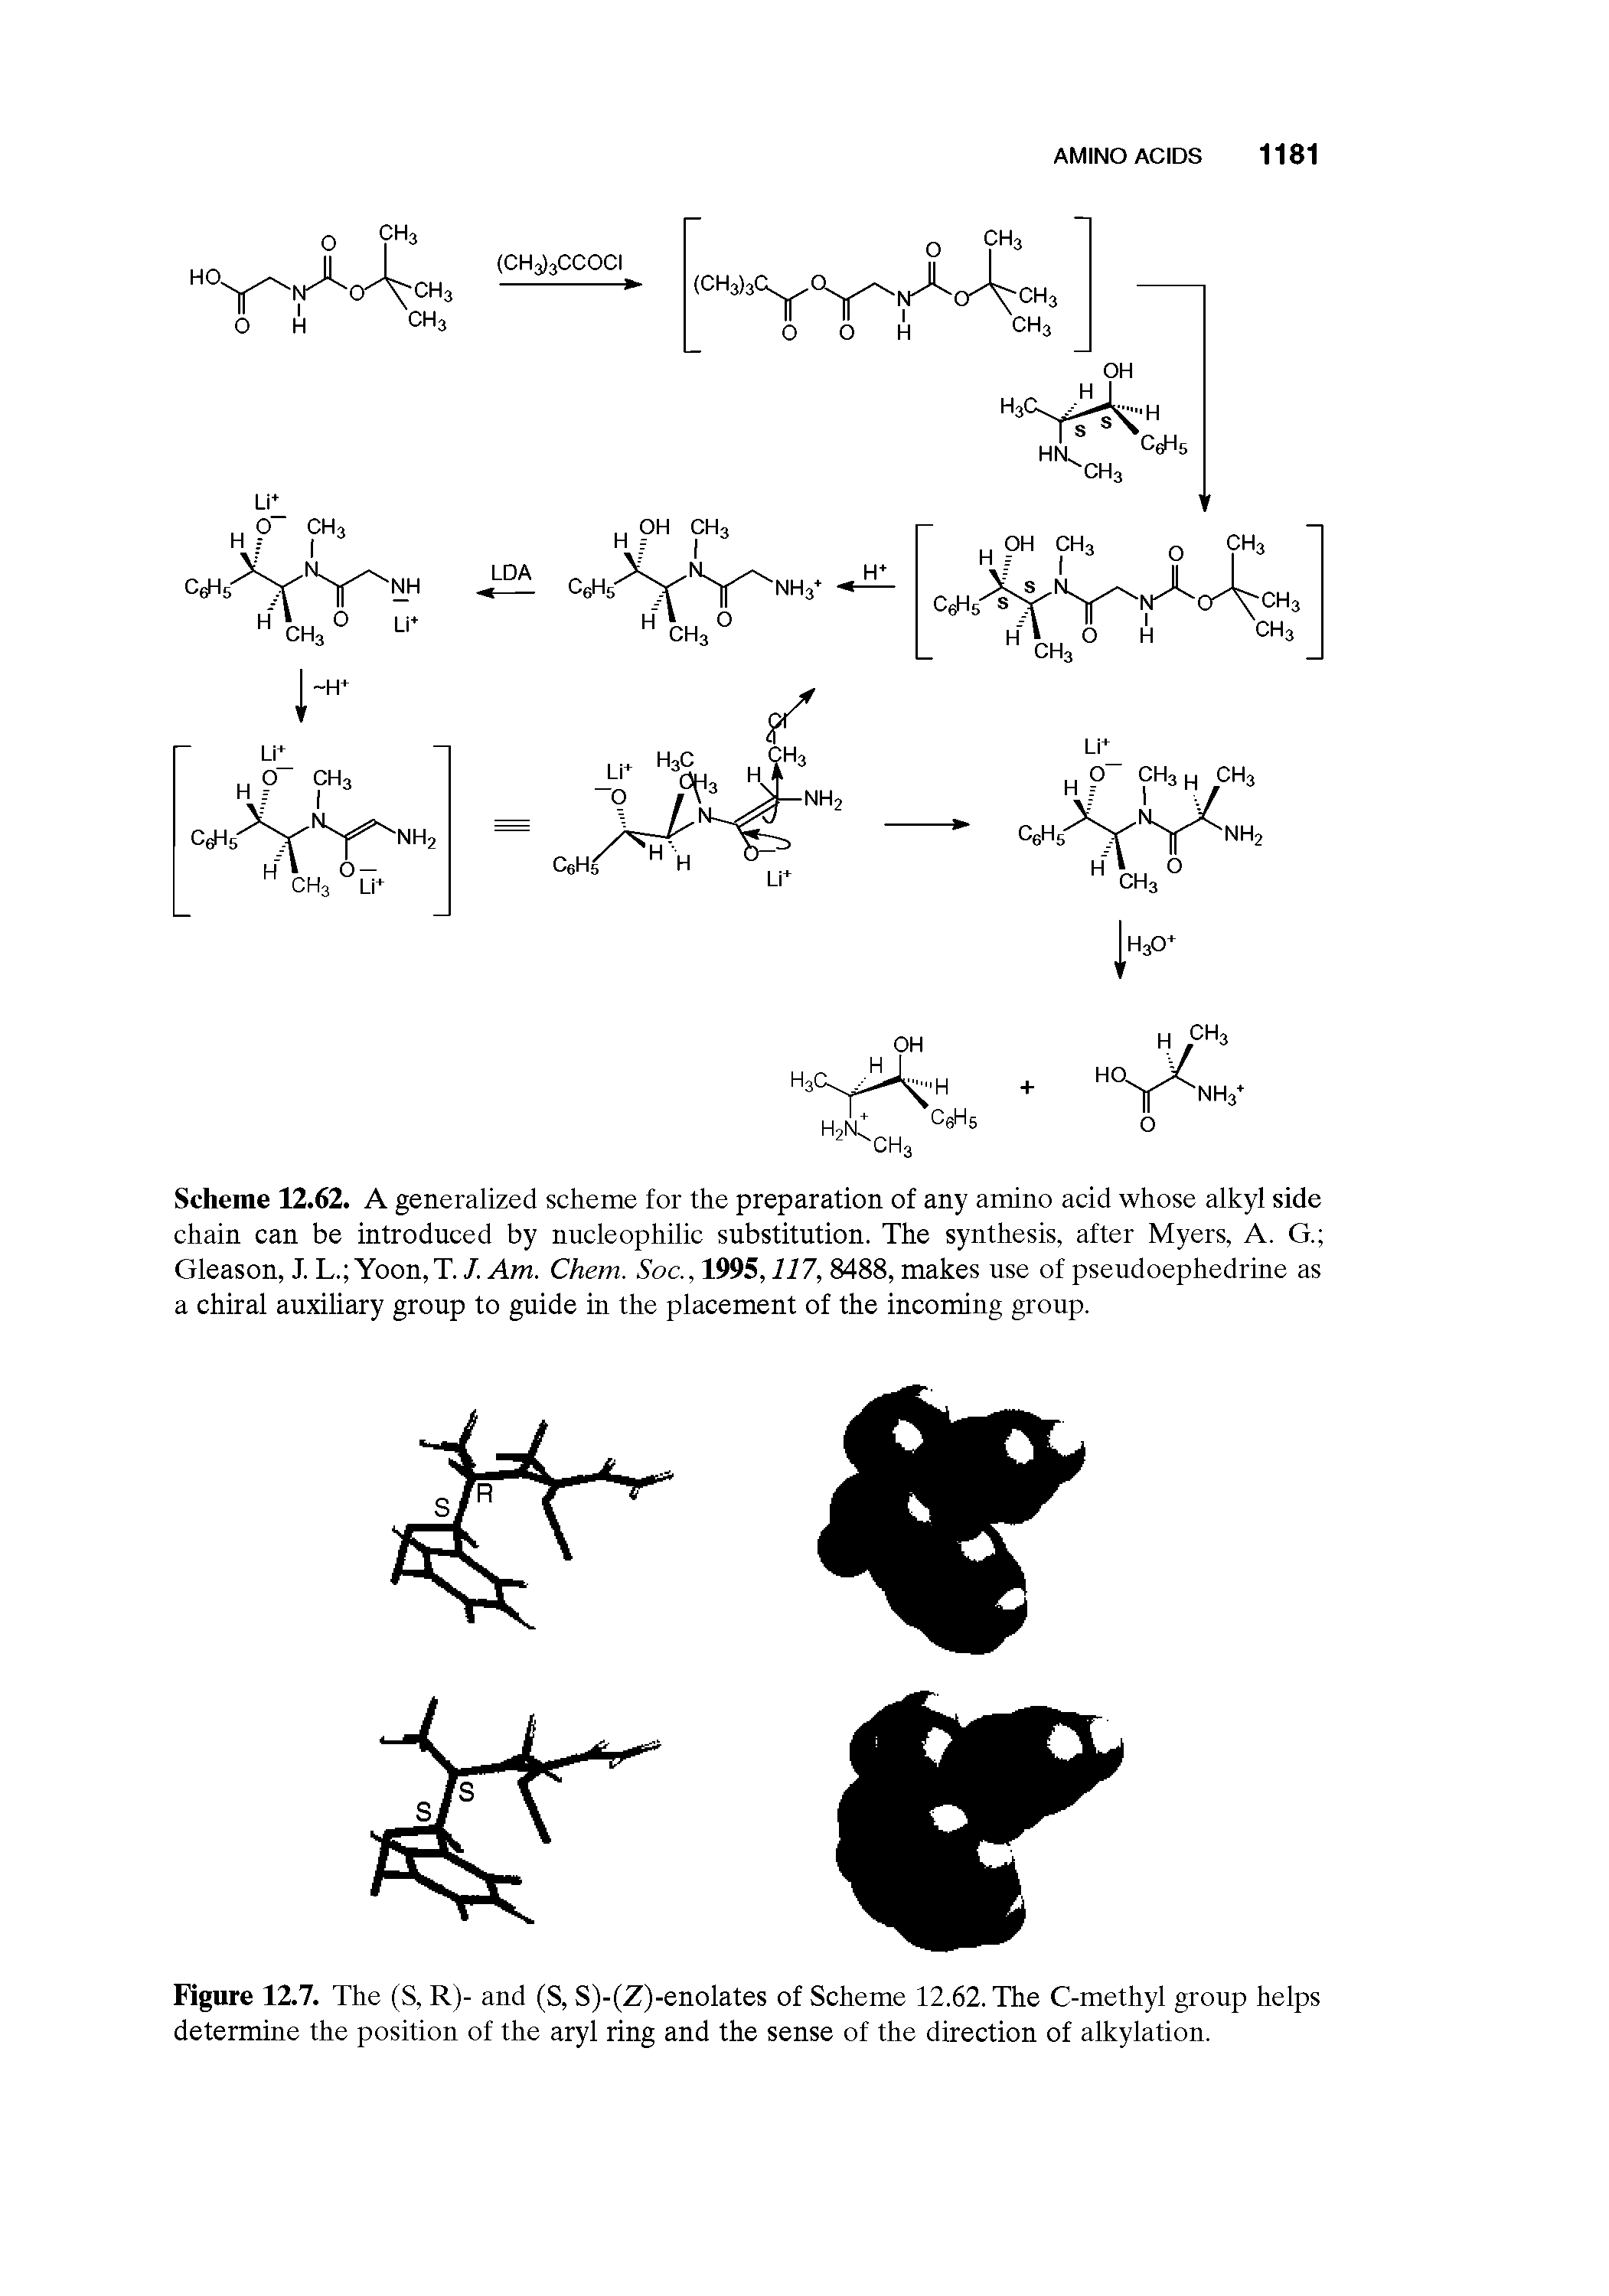 Scheme 12.62. A generalized scheme for the preparation of any amino acid whose alkyl side chain can be introduced by nucleophilic substitution. The synthesis, after Myers, A. G. Gleason, J. L. Yoon,T. /. Am. Chem. Soc., 1995,117,8488, makes use of pseudoephedrine as a chiral auxiliary group to guide in the placement of the incoming group.